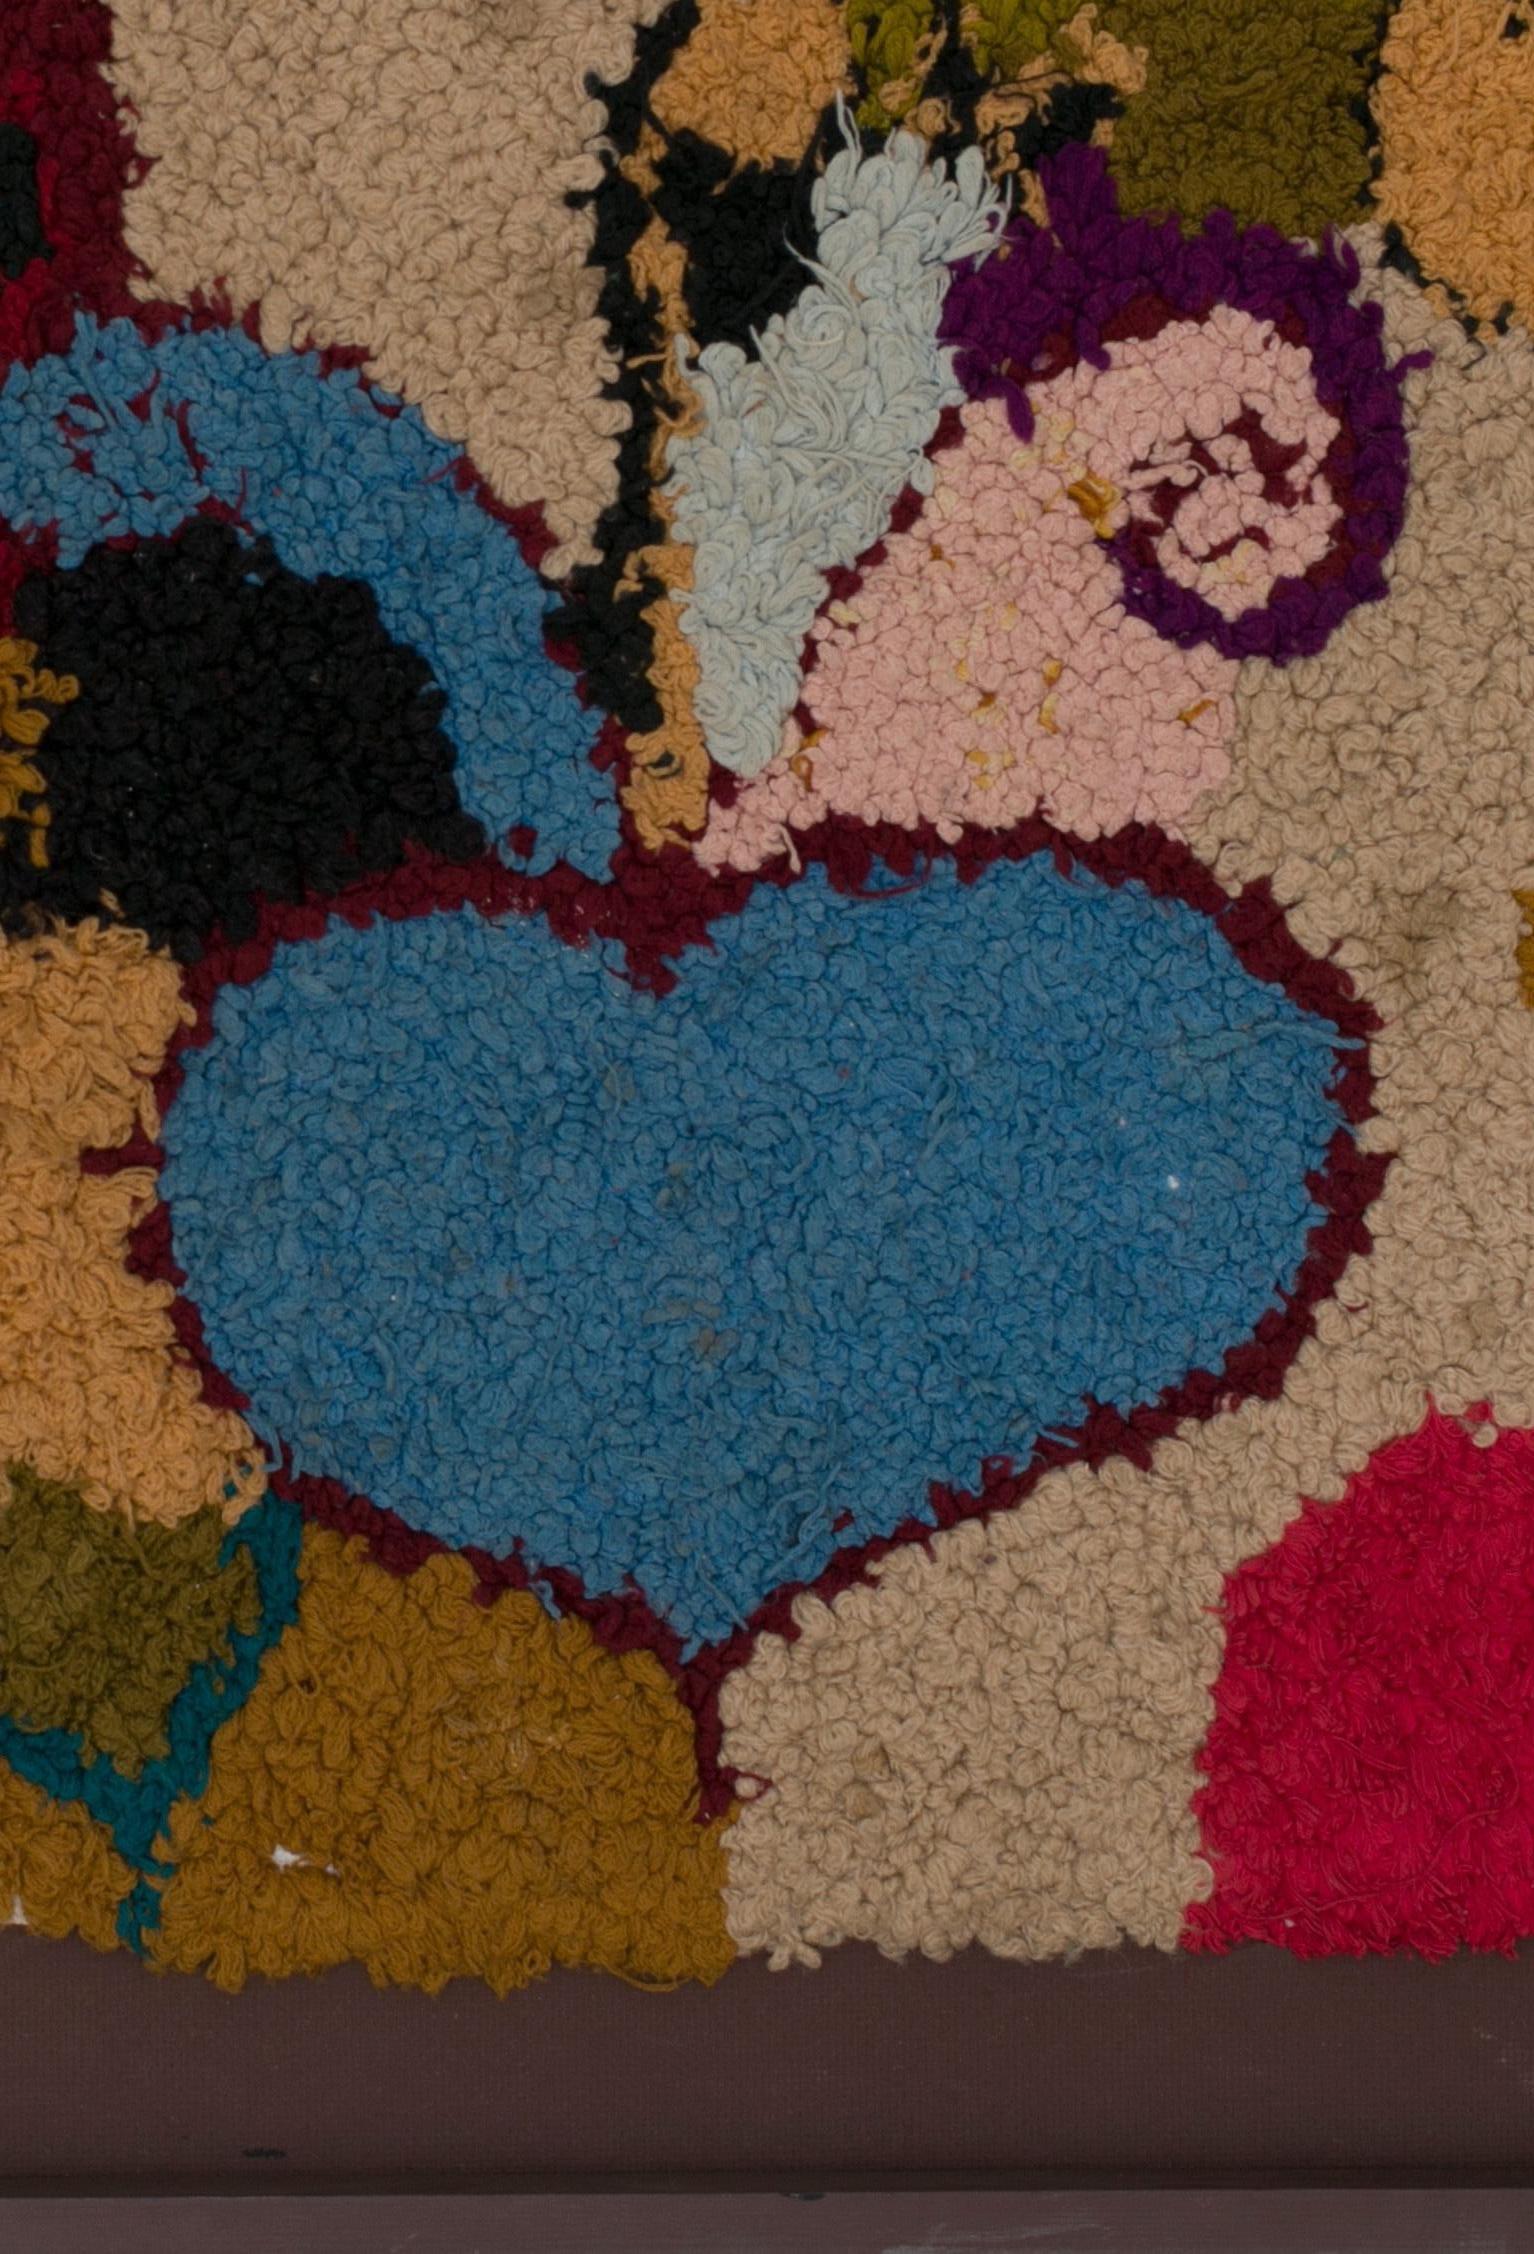 Protection and love, hand and heart both common symbolic representations
This tapestry was made by Berber women from the Atlas Mountains.
Made from woollen ends and other threads, embroidered on wasted plastic bags of cereals, this unique and